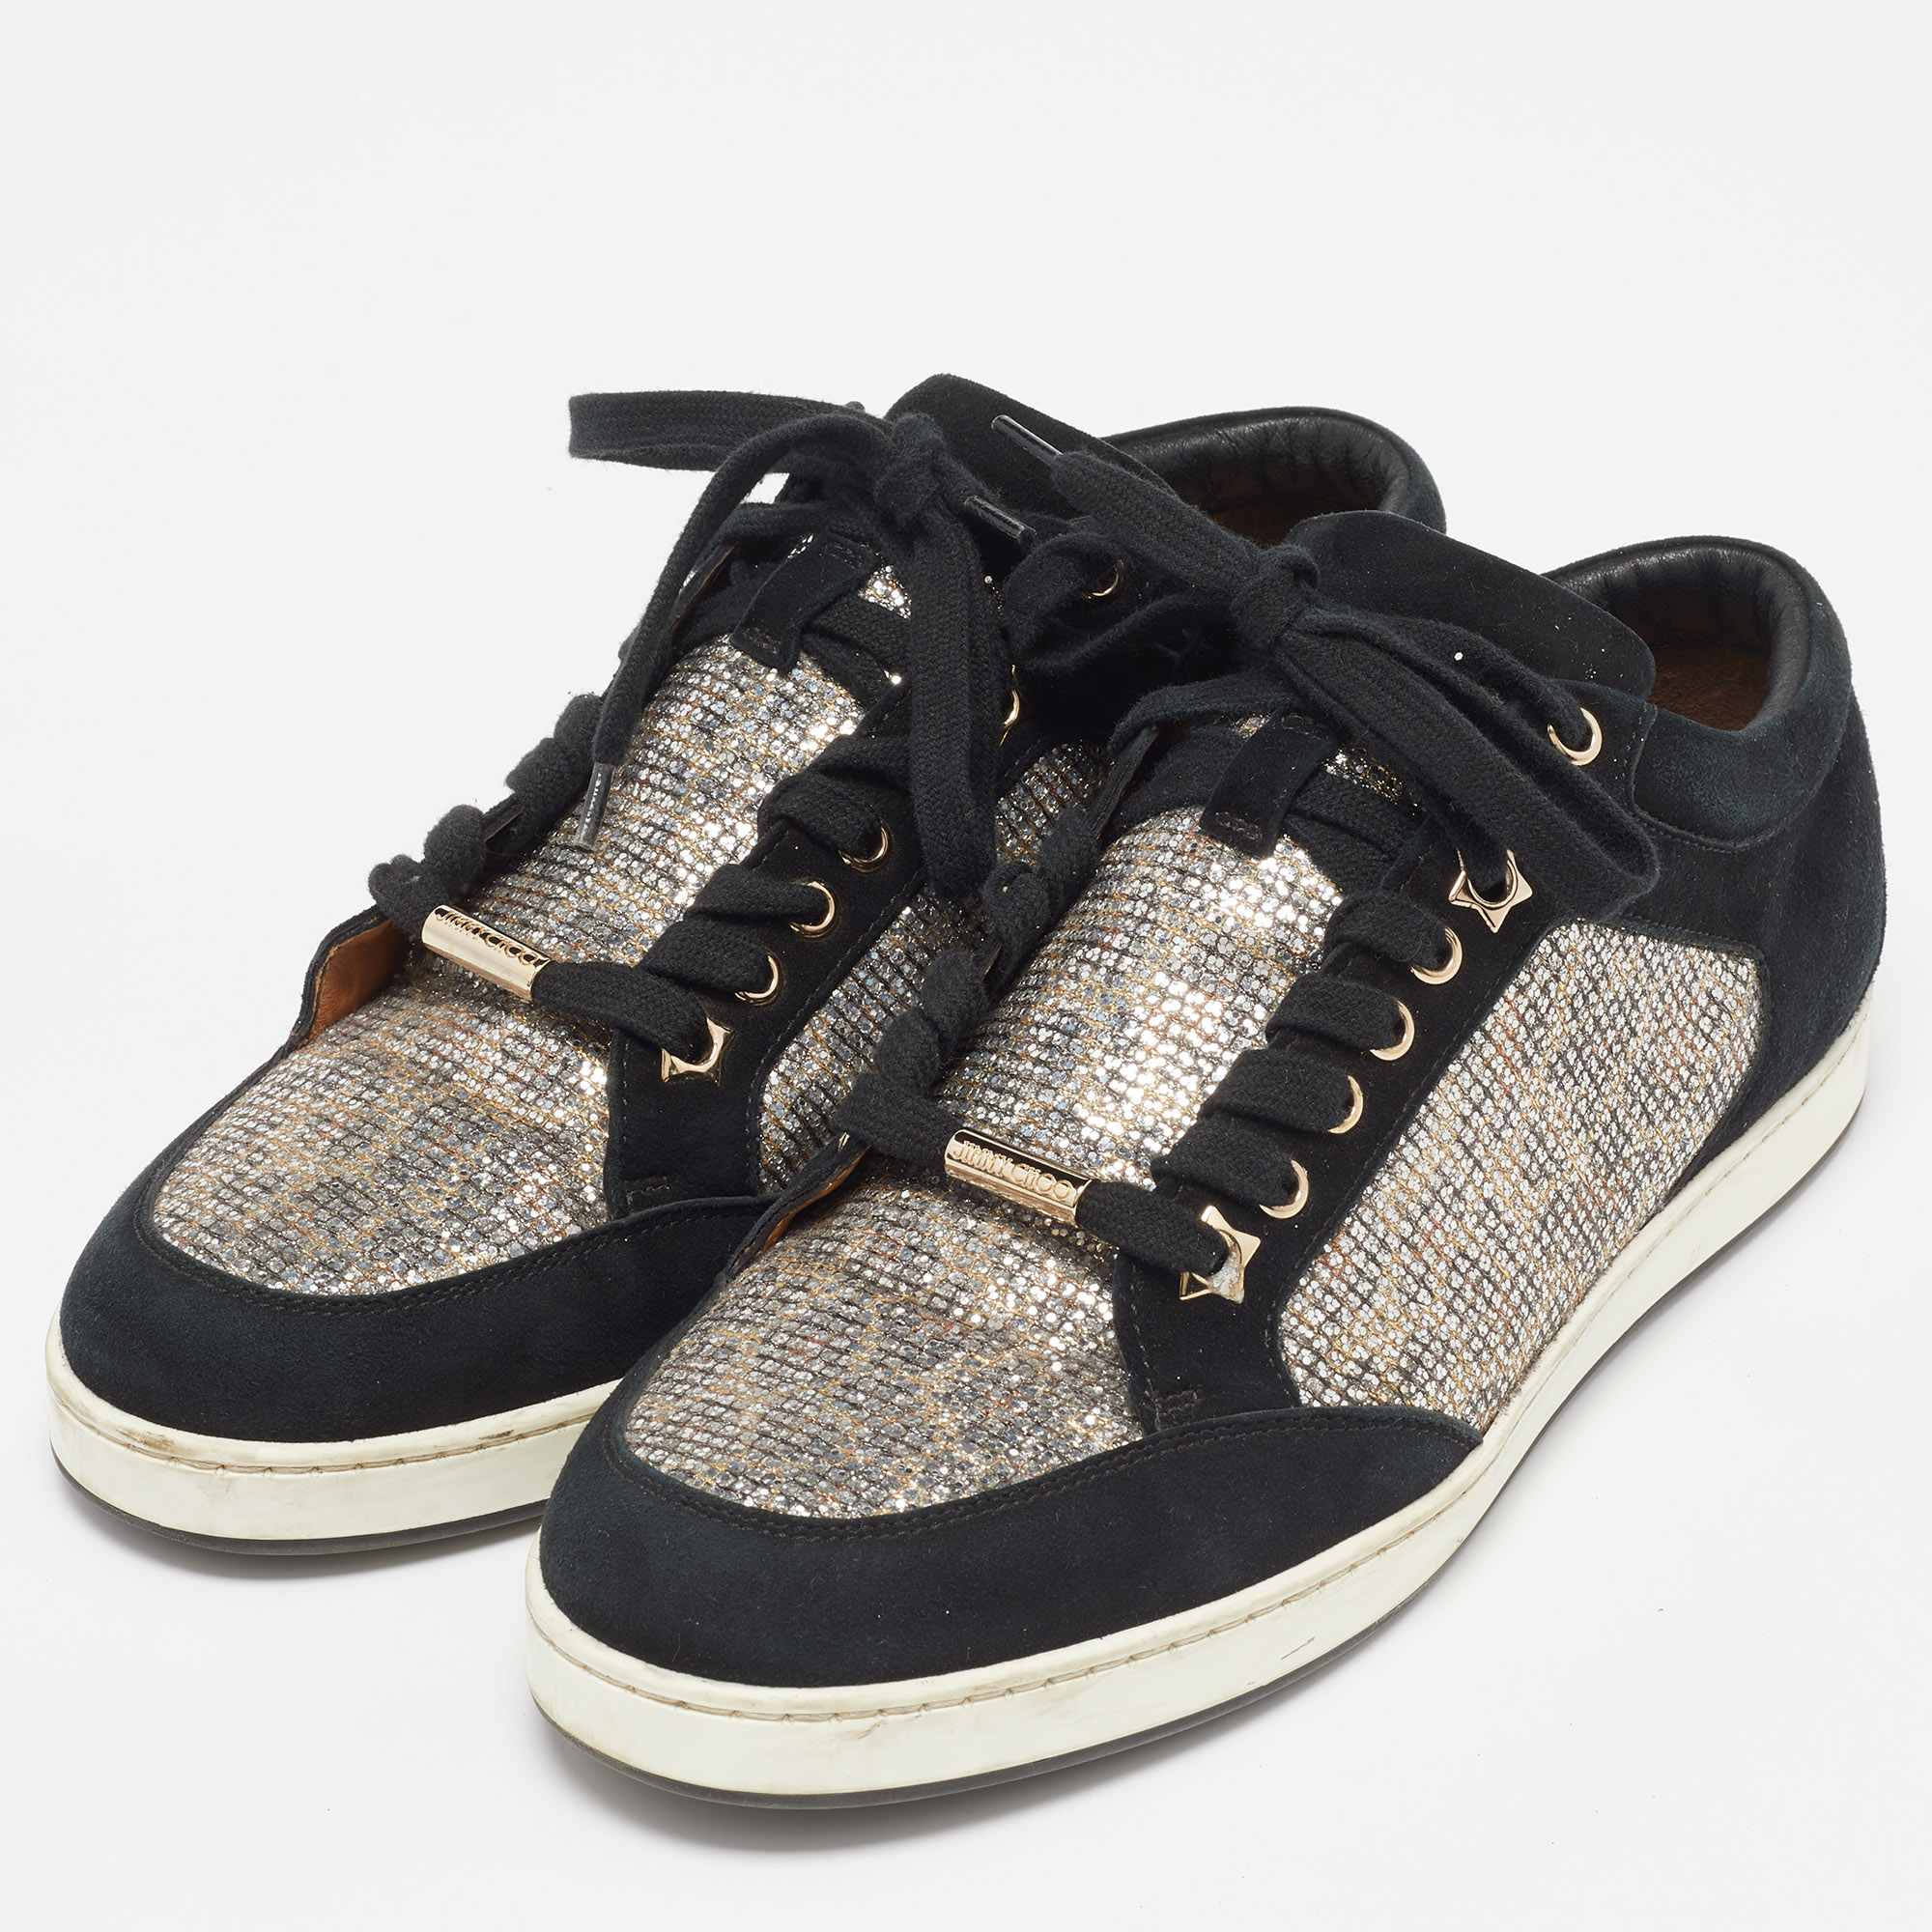 

Jimmy Choo Black Suede and Glitter Miami Low Top Sneakers Size